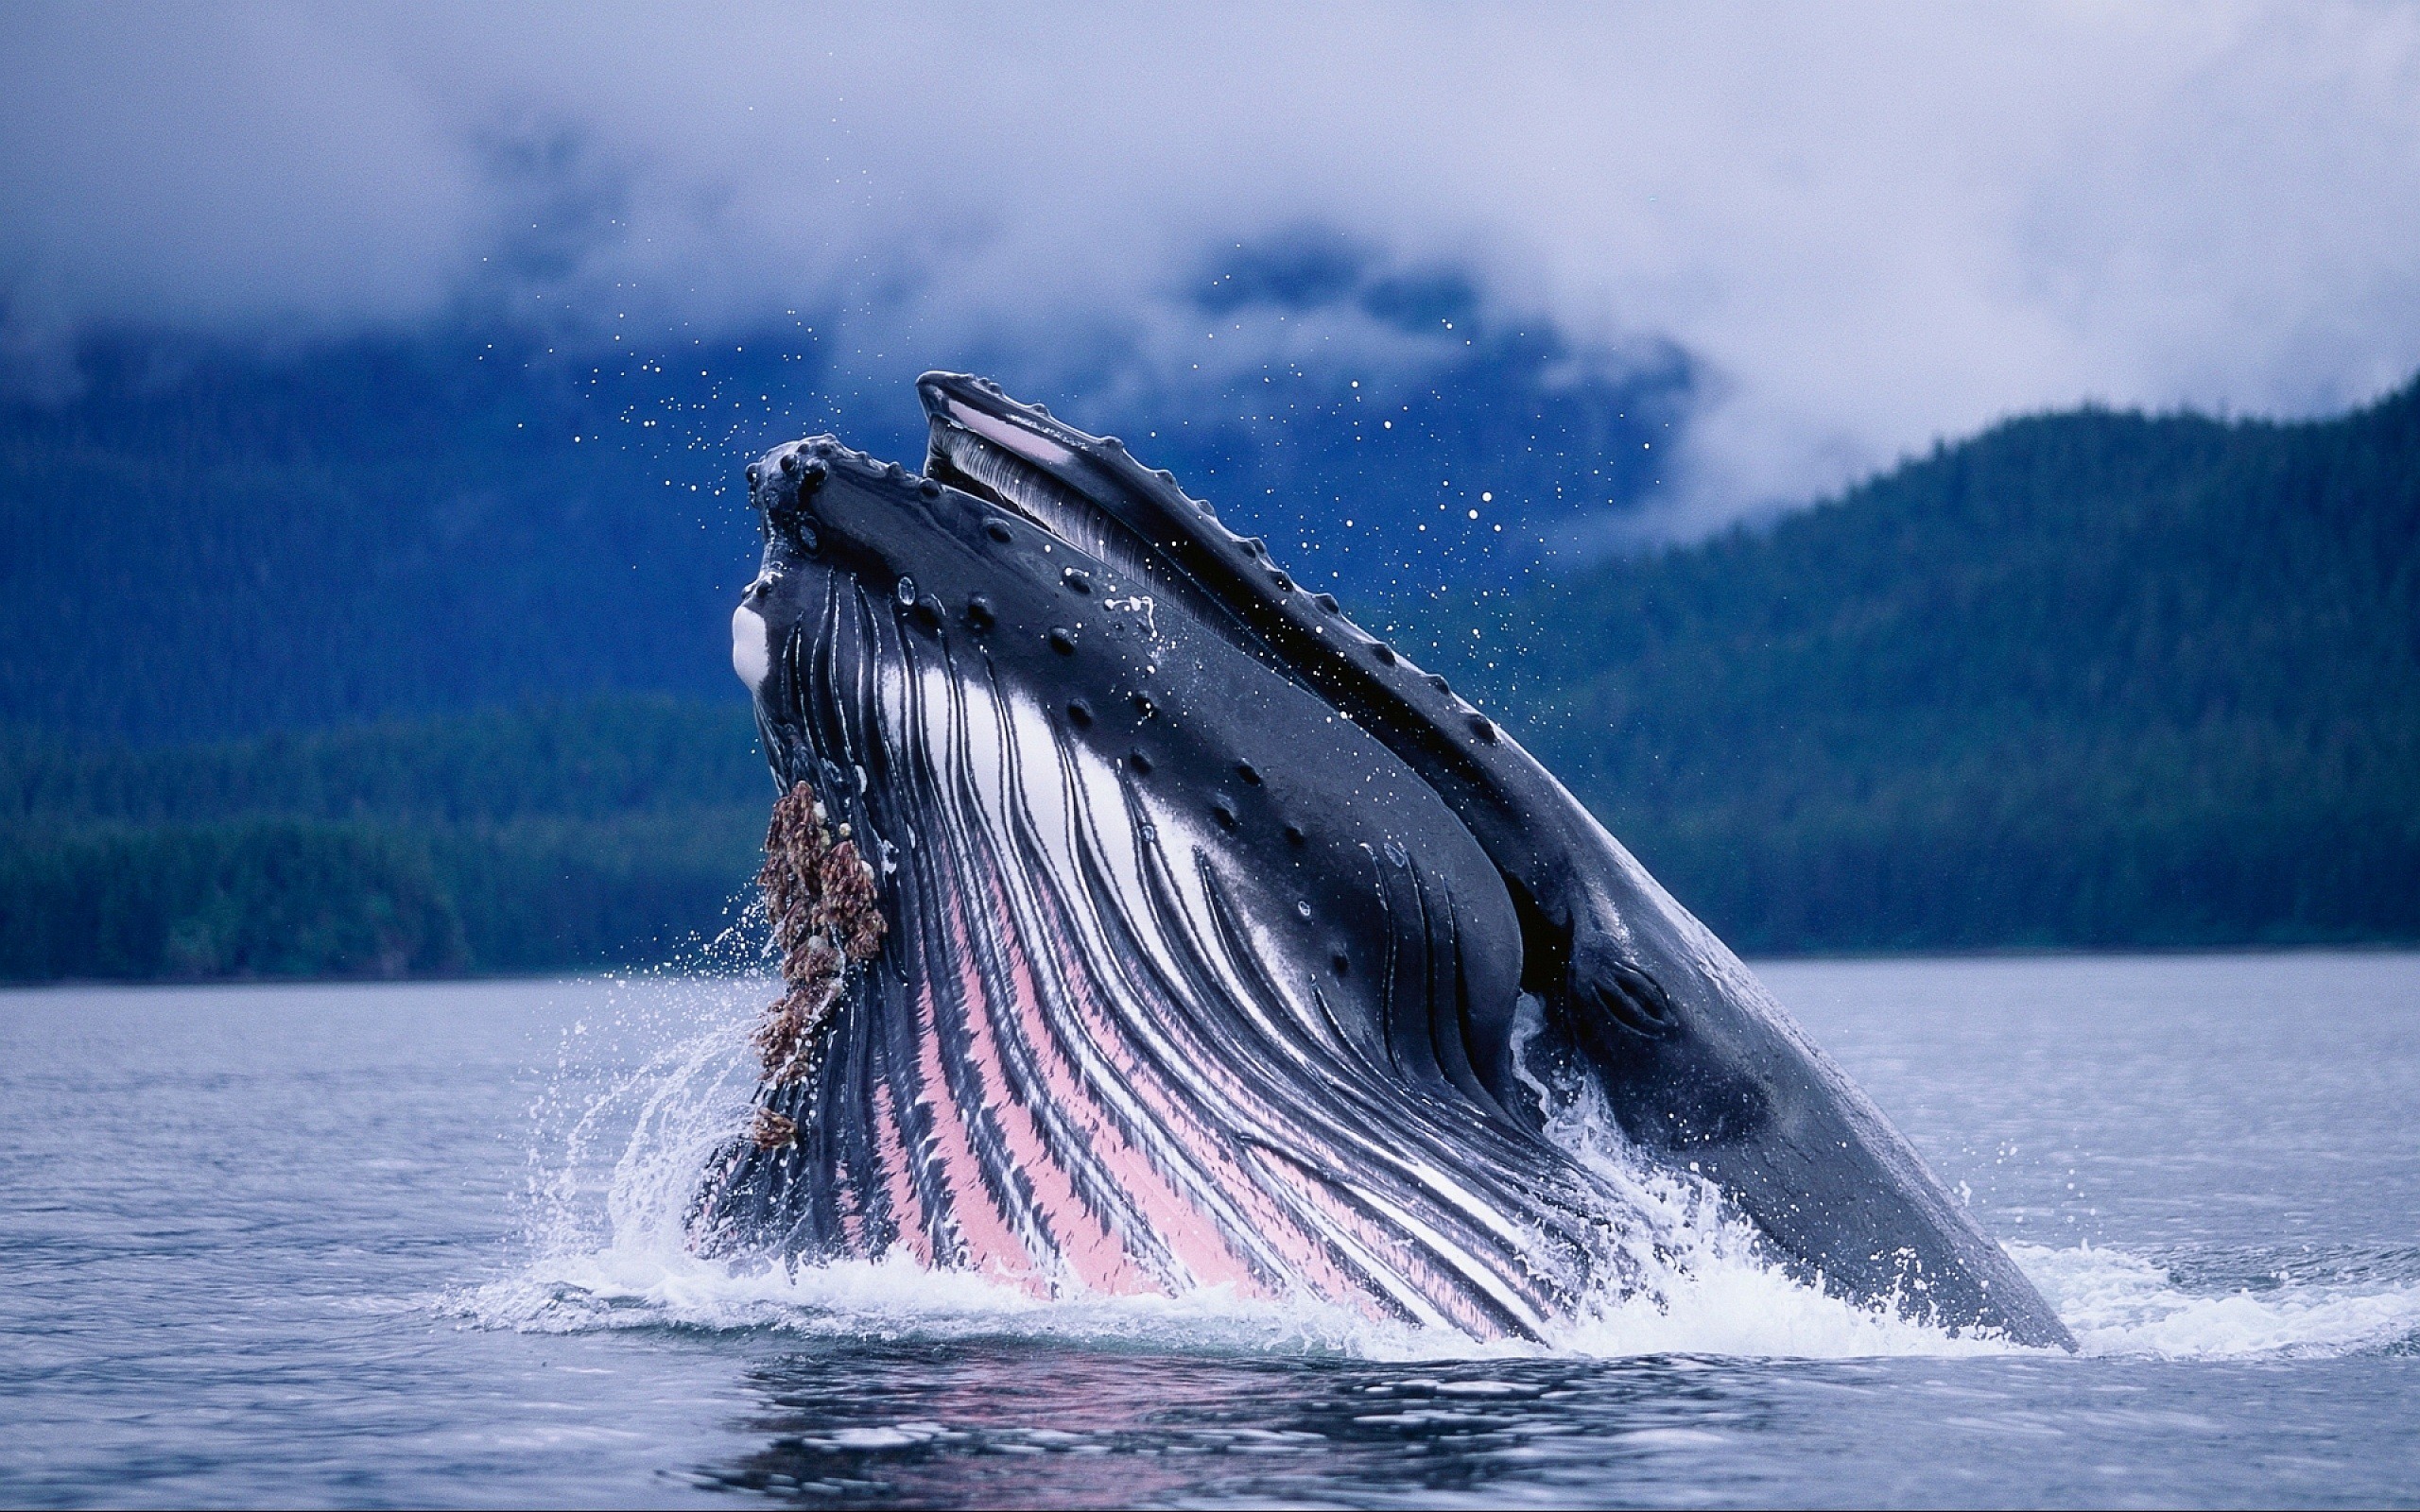 Wallpaper - Big Whale In The World - HD Wallpaper 